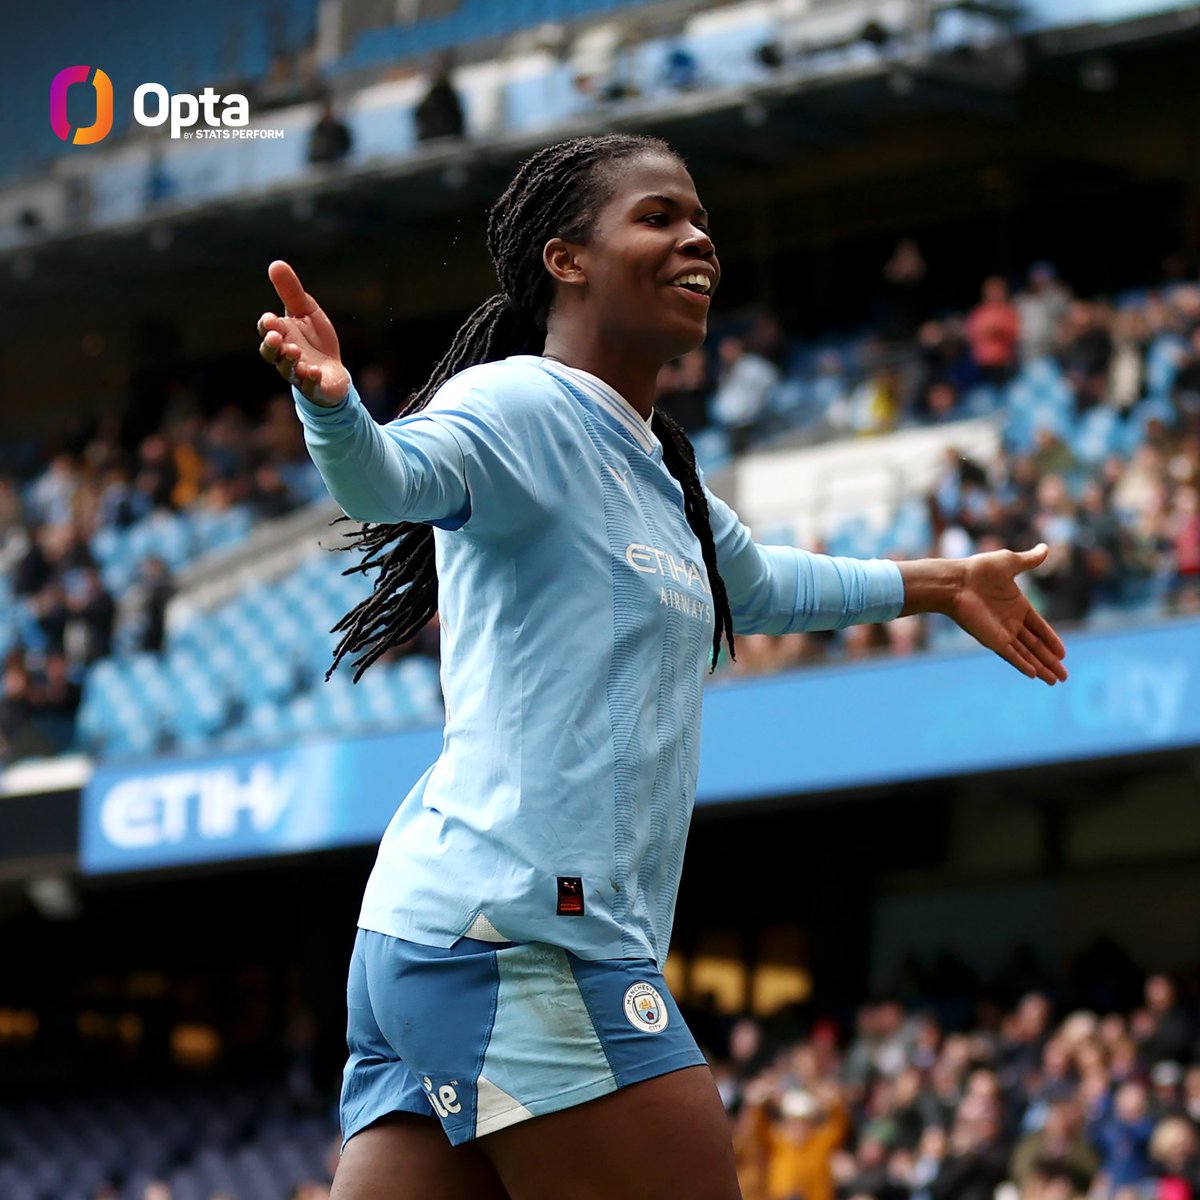 10 - With her goal against West Ham, Manchester City’s Khadija Shaw has become the first player in @BarclaysWSL history record a goal involvement in 10 consecutive appearances. Unrivalled.